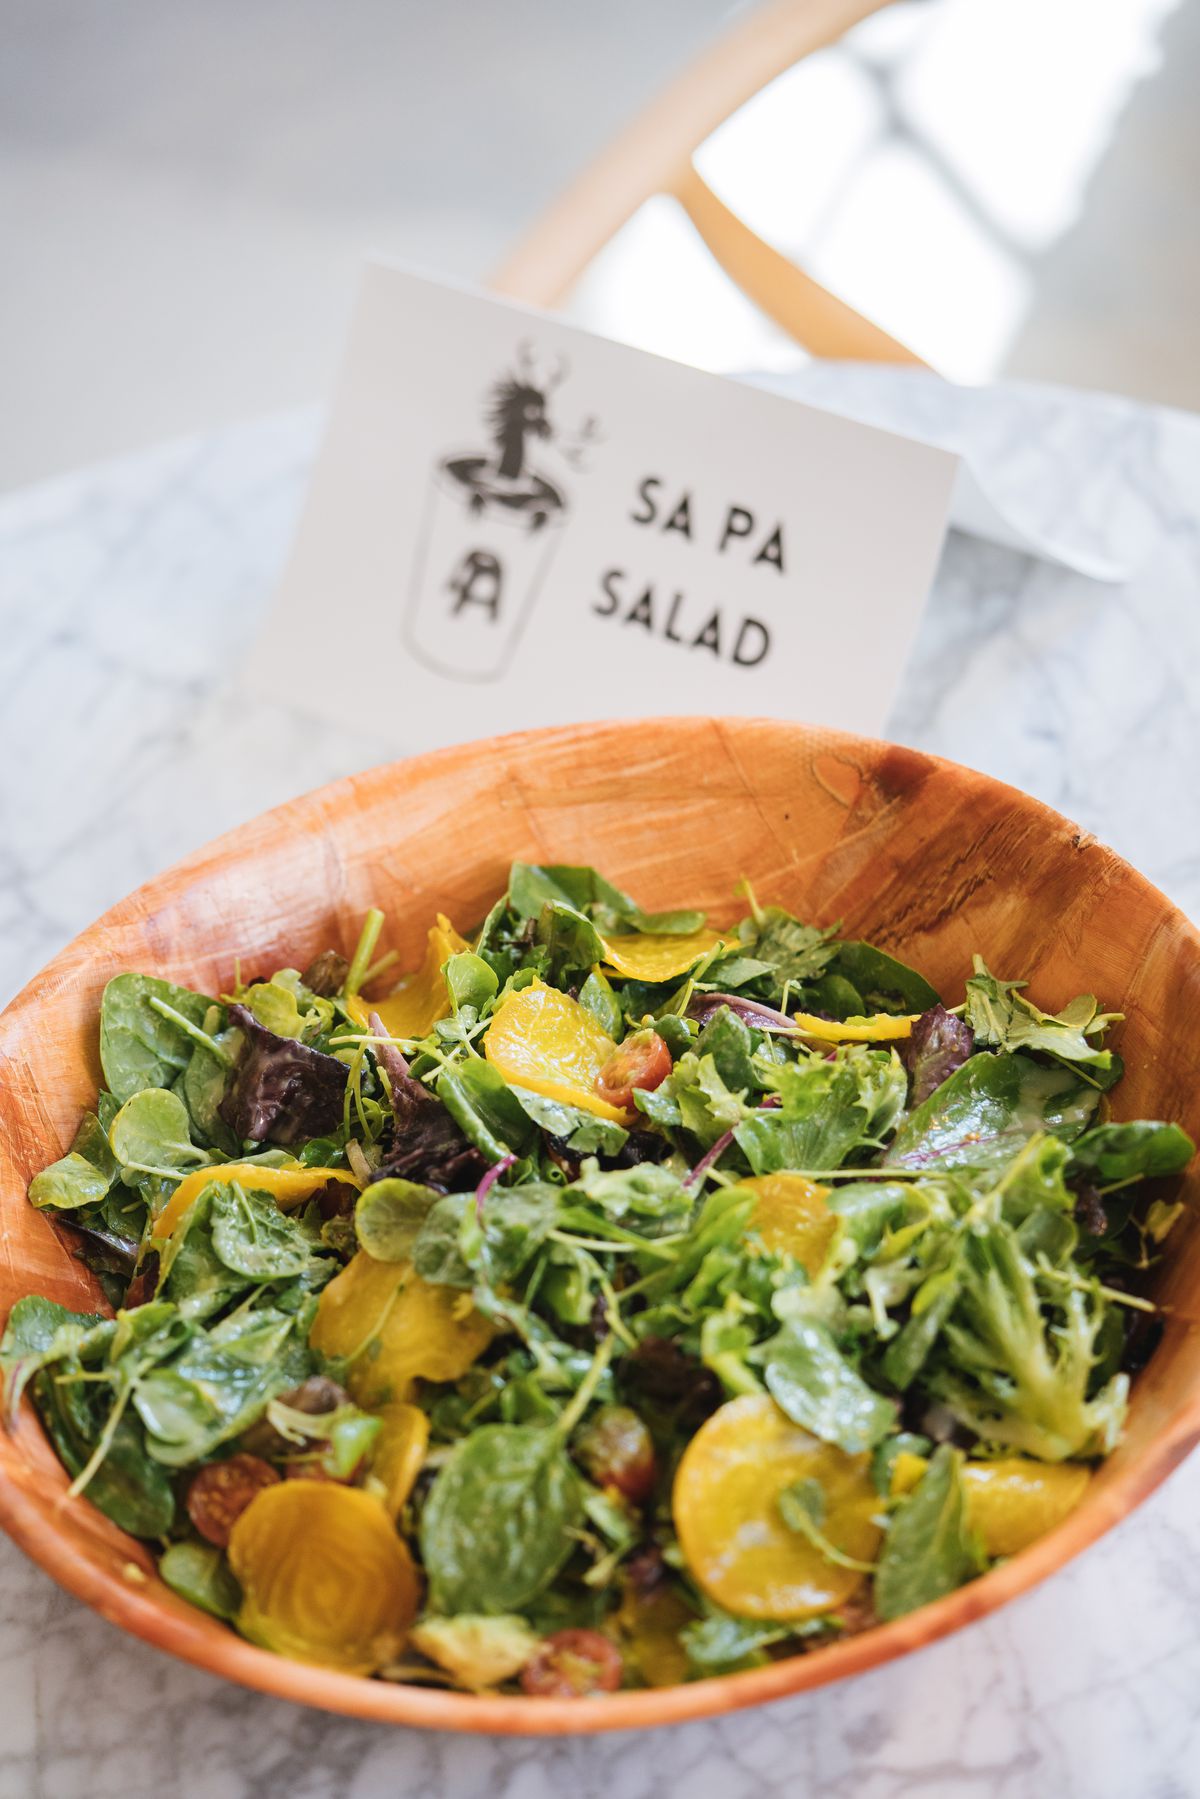 A salad with yellow beets in a brown bowl with a sign behind it that says Sa Pa Salad.